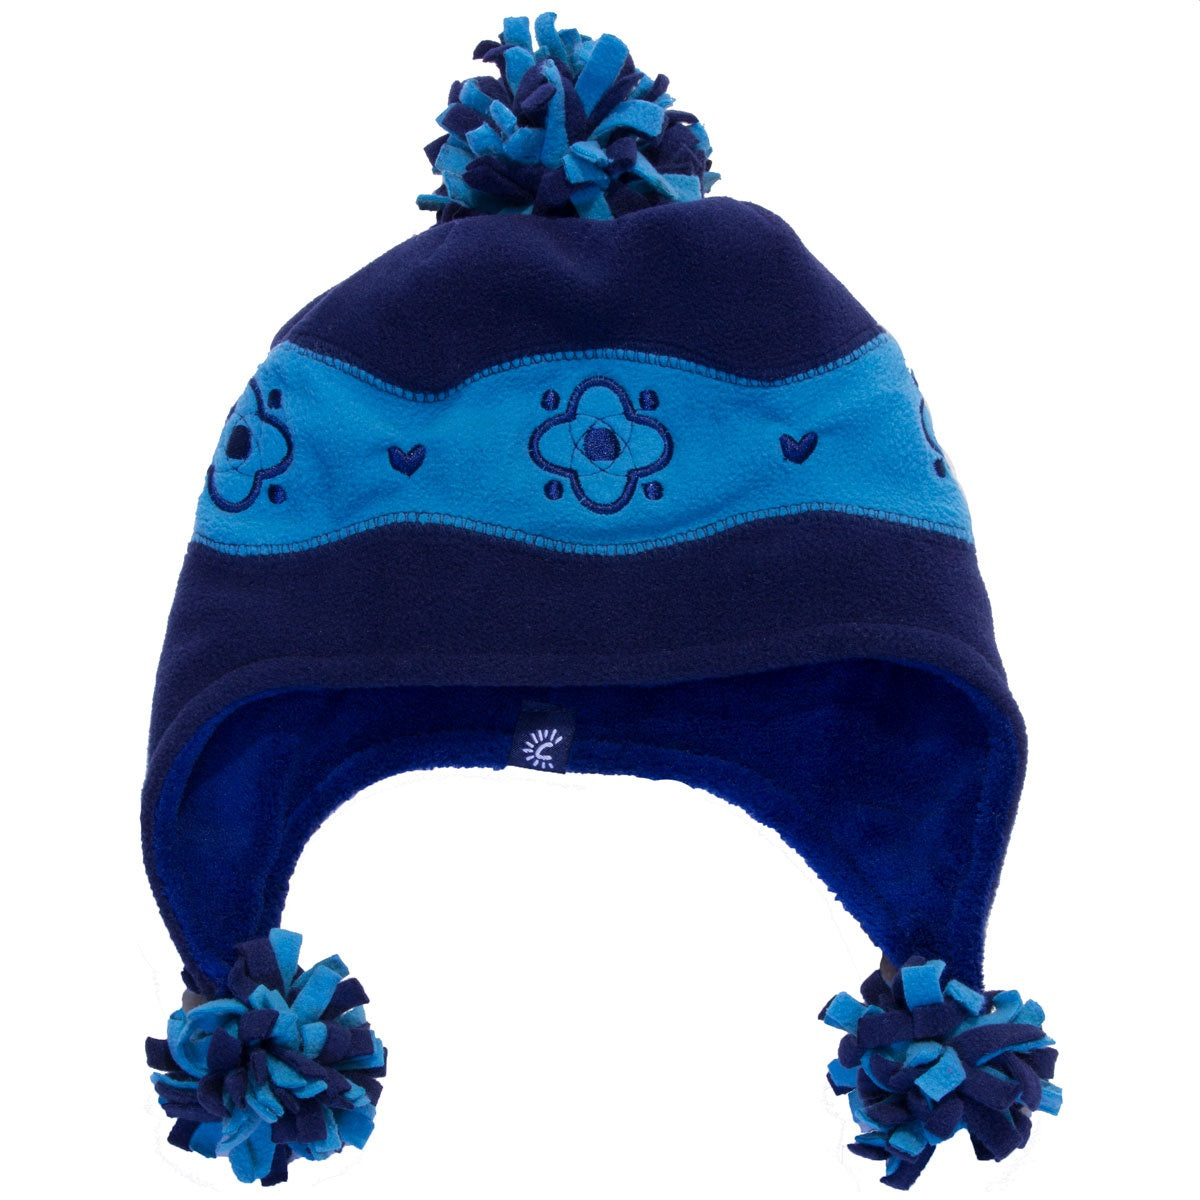 Terry Pom Hat - Navy/Blue - Large